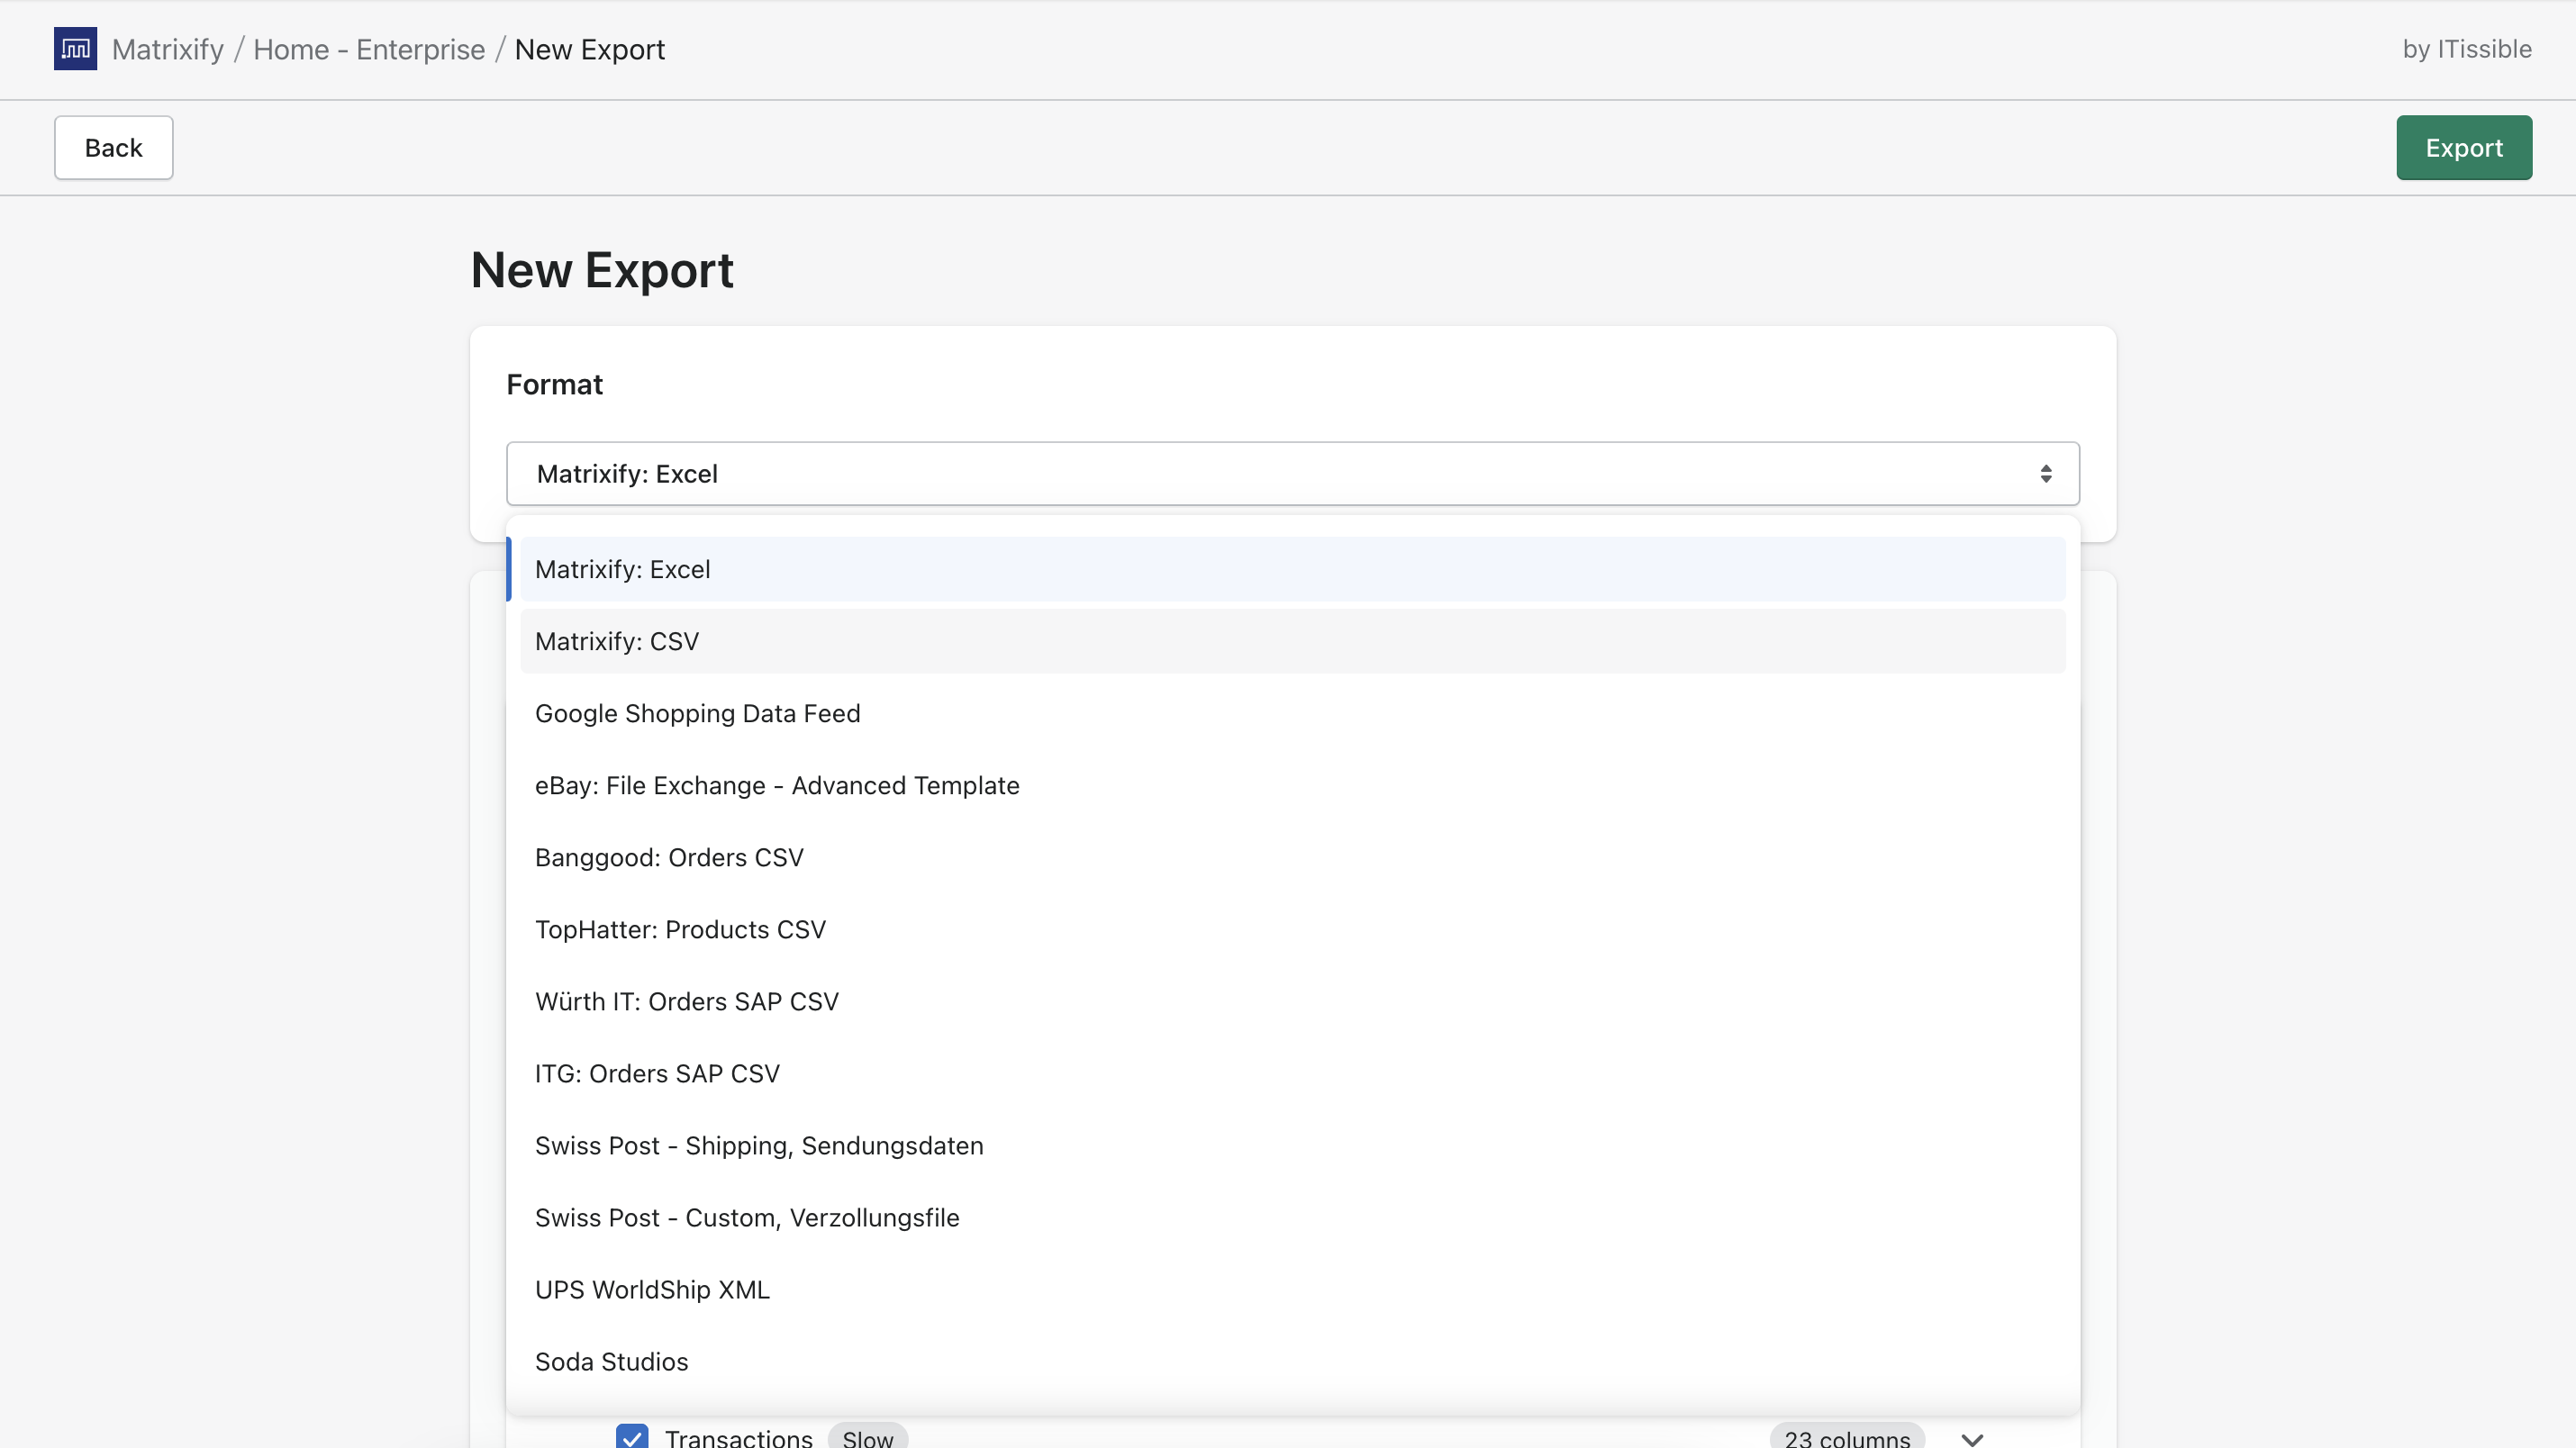 Export formats for Exporting Orders